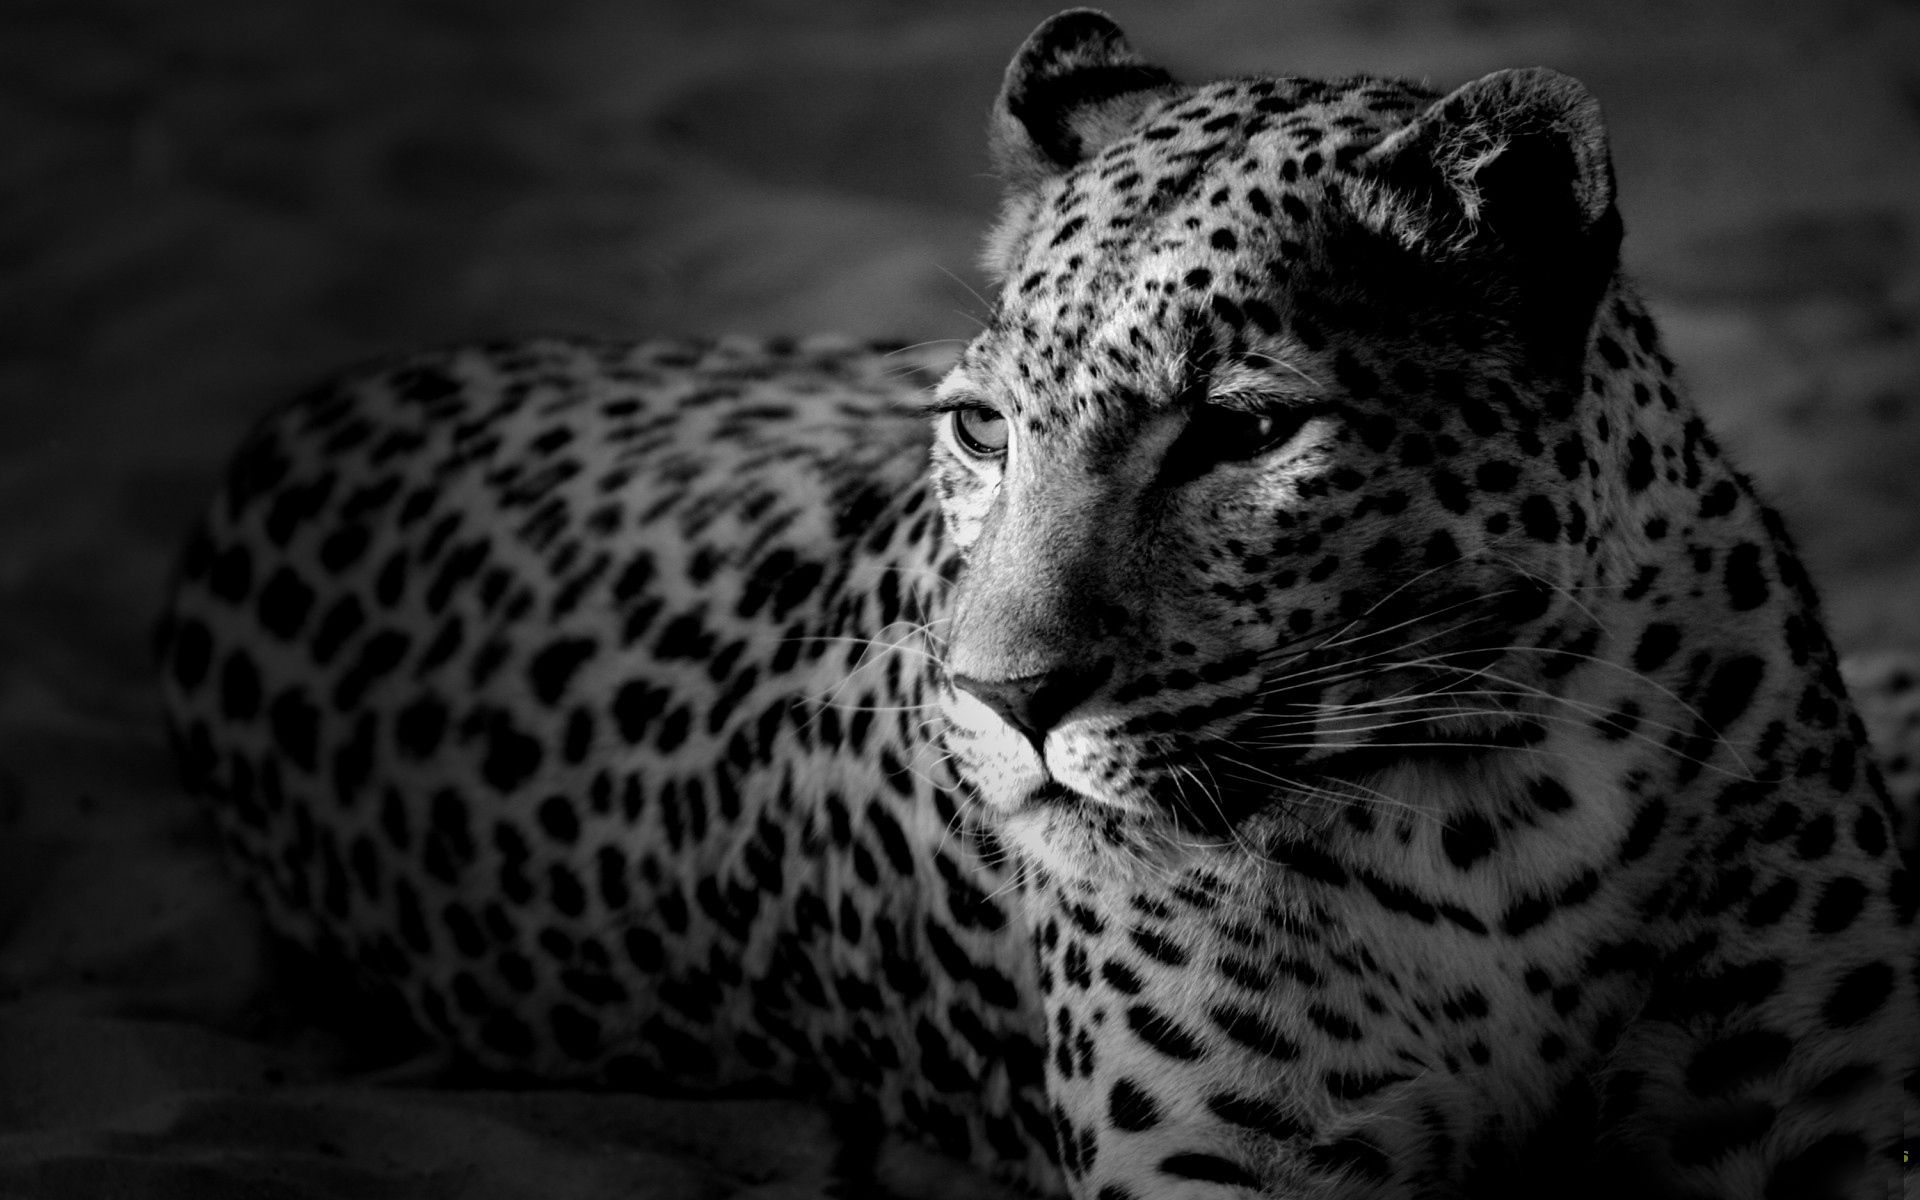 bw, spotted, chb, animals, leopard, spotty, color